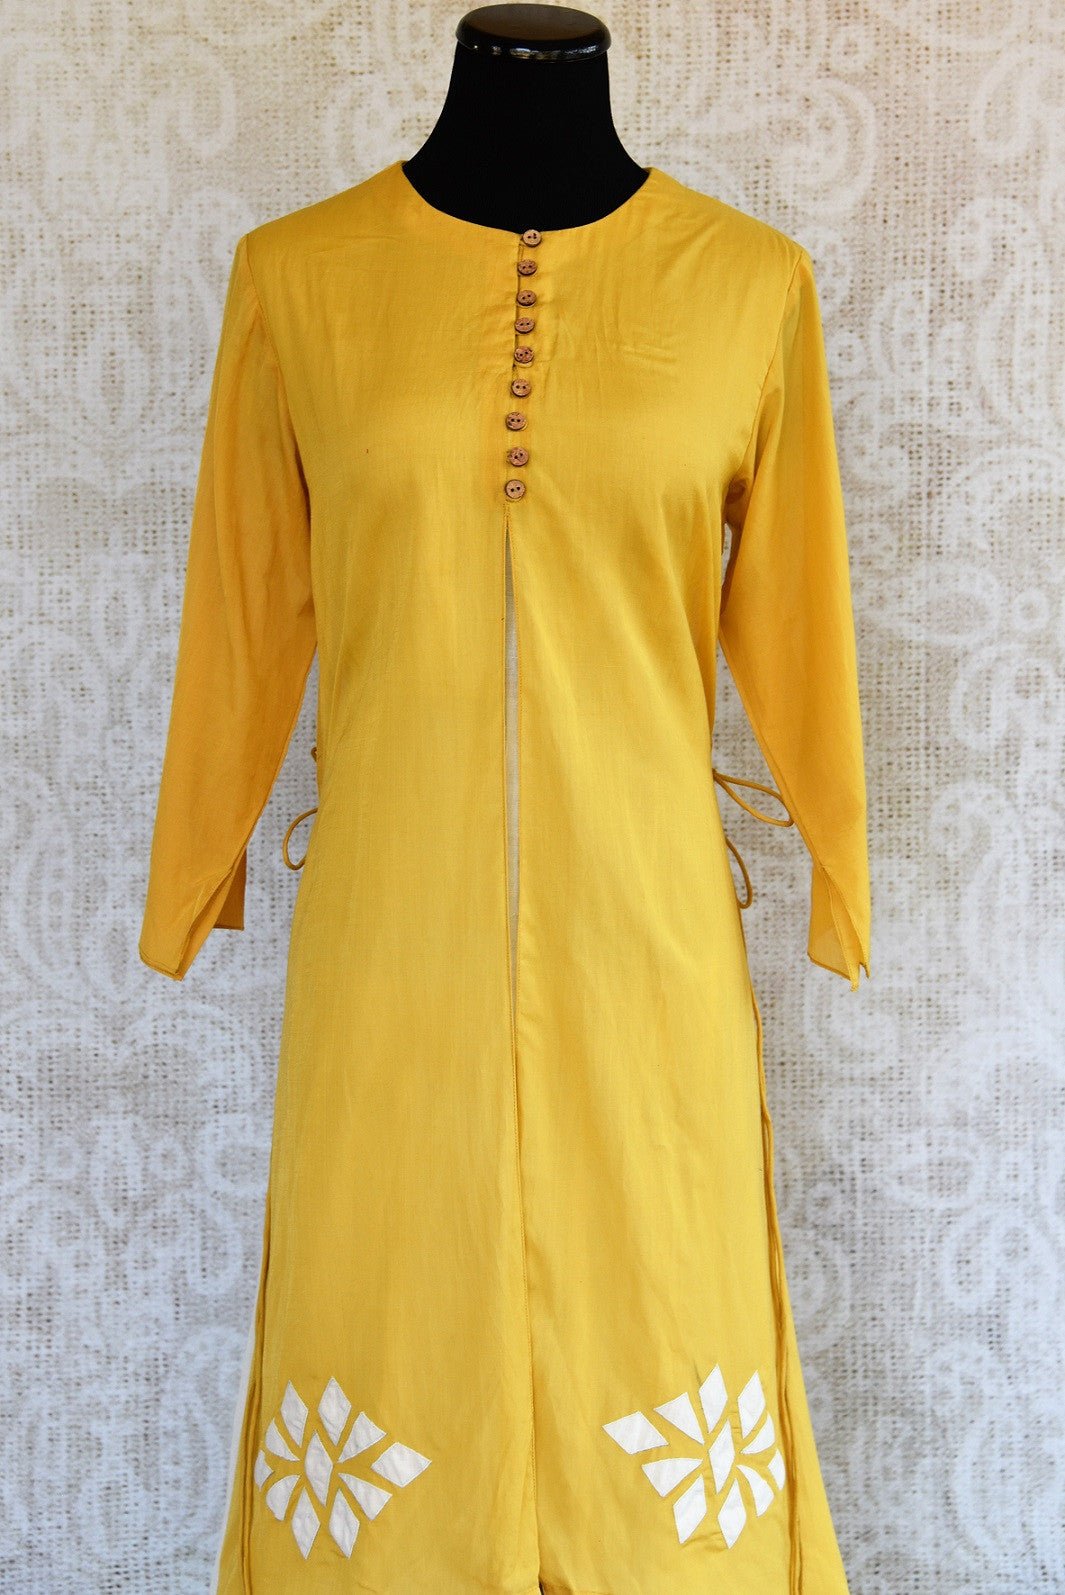 Buy this mustard Indo western yellow and white Indian ethnic dress online from our Pure Elegance store in USA. It is perfect for any wedding or reception party. Close up.